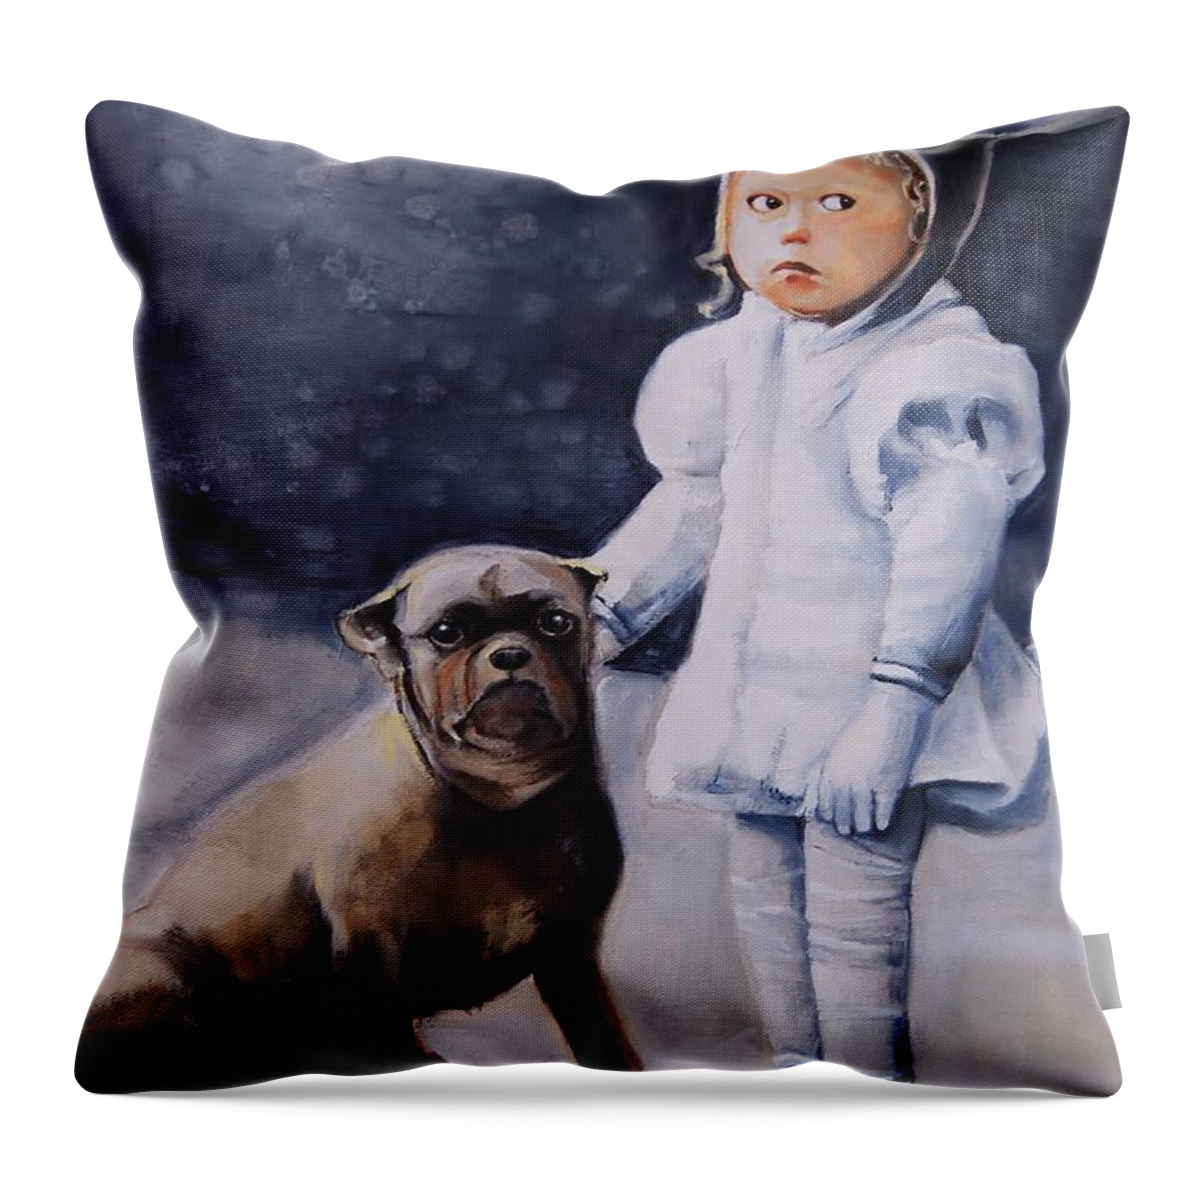 Moonbeams Throw Pillow featuring the painting Mr Moonbeams by Jean Cormier